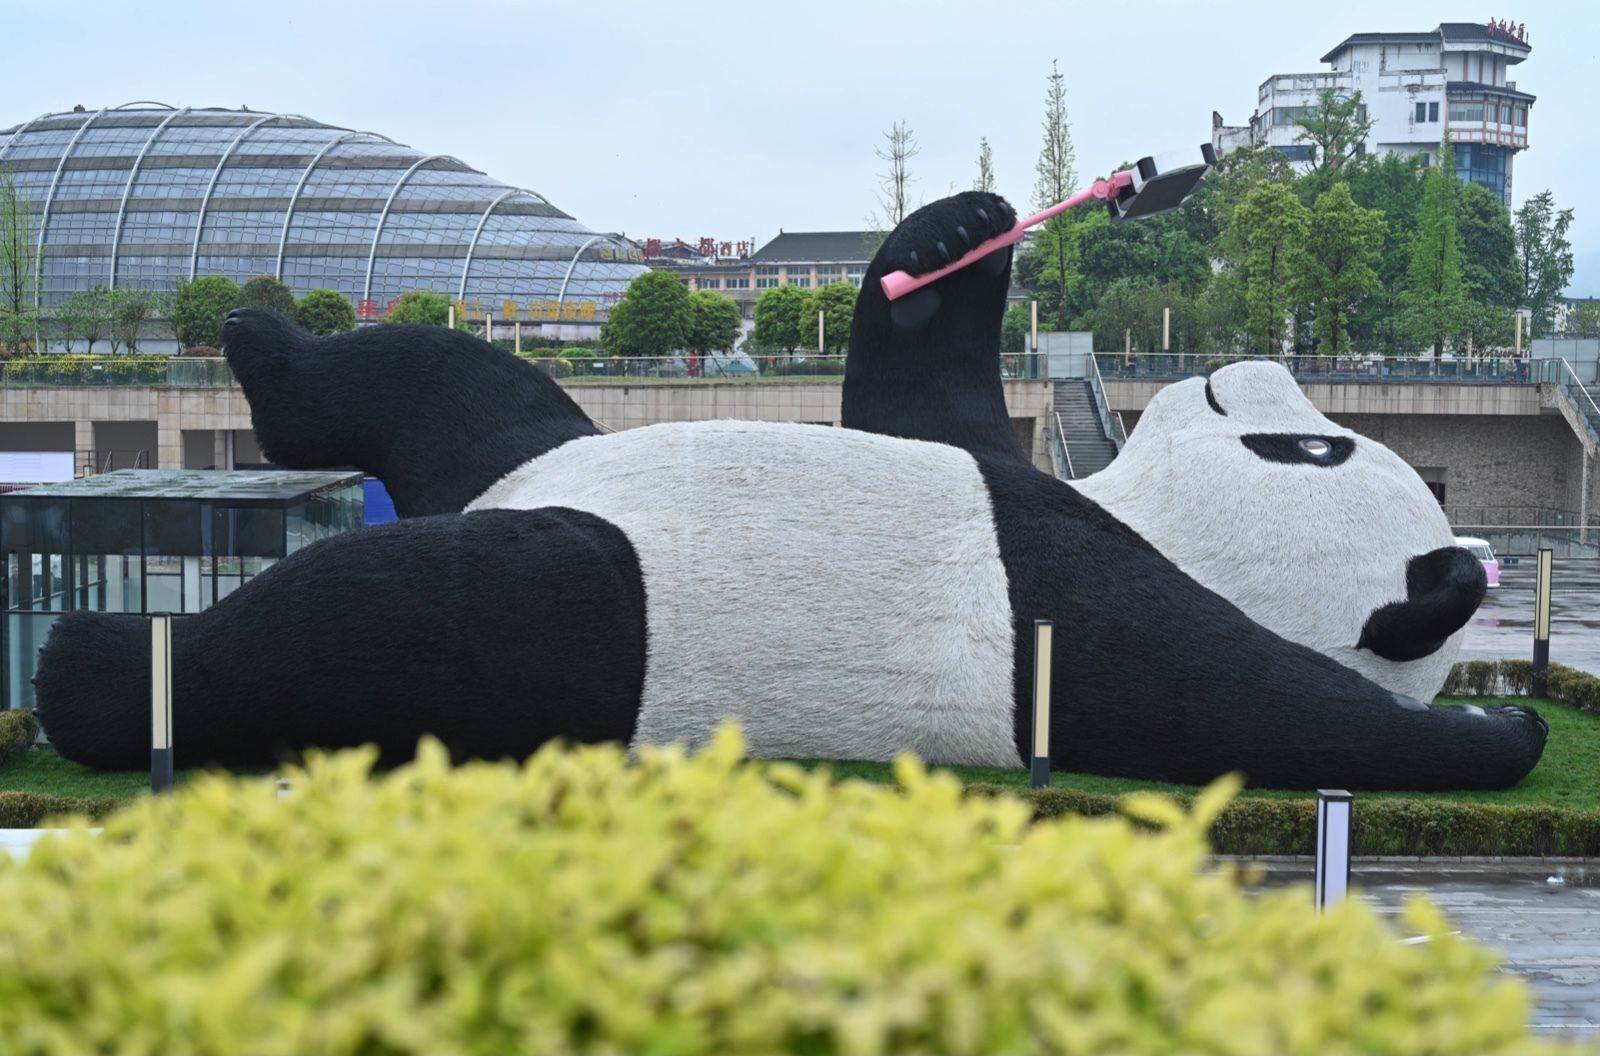  WORLD'S;HEAVIEST;130TON;GIANT;PANDA;SCULPTURE;UNVEILED;CHENGDU;CHINA;07;APR;2021;APRIL;7;DUJIANGYAN;CITY;SICHUAN;PROVINCE;A;LEISURELY;CUTE;SELFIE;THAT;LOOKS;LIKE;SELFPORTRAIT;3;YANGTIANWO;SQUARE;WAS;OFFICIALLY;OPENED;PUBLIC;ART;ALSO;AT;SAME;TIME;THIS;SHAPE;STICK;IS;26;METERS;LONG;11;WIDE;12;HIGH;WEIGHS;130;TONS;IT;CURRENTLY;FIXED;BY;MILLION;LACQUERED;STAINLESS;STEEL;WIRES;BEHIND;TRENDY;COMMUNITY;INTEGRATES;CULTURAL;CREATION;LEISURE;FOOD;INTERNET;CELEBRITY;CHECKIN;CREATES;WONDERFUL;NEW;CONSUMPTION;SCENE;AN;GIFT;PRESENTED;LARGEST;COMPANY;UAP;DUTCH;ARTIST;FLORENTINE;HOFFMAN;PLACED;TIANFU;GREENWAY;LYING;ITS;BACK;ACCORDING;DESIGNER;WORK;VERY;ENTERTAINING;WHEN;HE;LIFTS;HIS;MOBILE;PHONE;TAKE;SELFIES;RELAXED;LOOK;POSTURE;ARE;EXPRESSION;ARTISTIC;LANGUAGE;LOCAL;LIFE;VIEWER;FEELS;CORDIAL;PLEASANT;UNIQUE;TERMS;VOLUME;FORM;CONCEPT;AS;SAID;RESTORING;TRUE;STORY;DREAMY;ENTERING;WILL;BRING;EVERY;VISITOR;UNFORGETTABLE;EXPERIENCE;HOPES;THROUGH;ARTWORK;PEOPLE;HAVE;DEEPER;UNDERSTANDING;WORLD;NATURAL;HERITAGE;WATER;CONSERVANCY;IRRIGATION;PROJECT;VERITABLE;CAPITAL.IT;UNDERSTOOD;AFTER;OFFICIAL;MEETING;WITH;YOU;START;NAME;COLLECTION;ACTIVITY;NEXT;VISITORS;CAN;USE;DRONES;PANDAS;FOR;EXCLUSIVE;VLOG;SHOOTING;CLOCKIN;98855848 